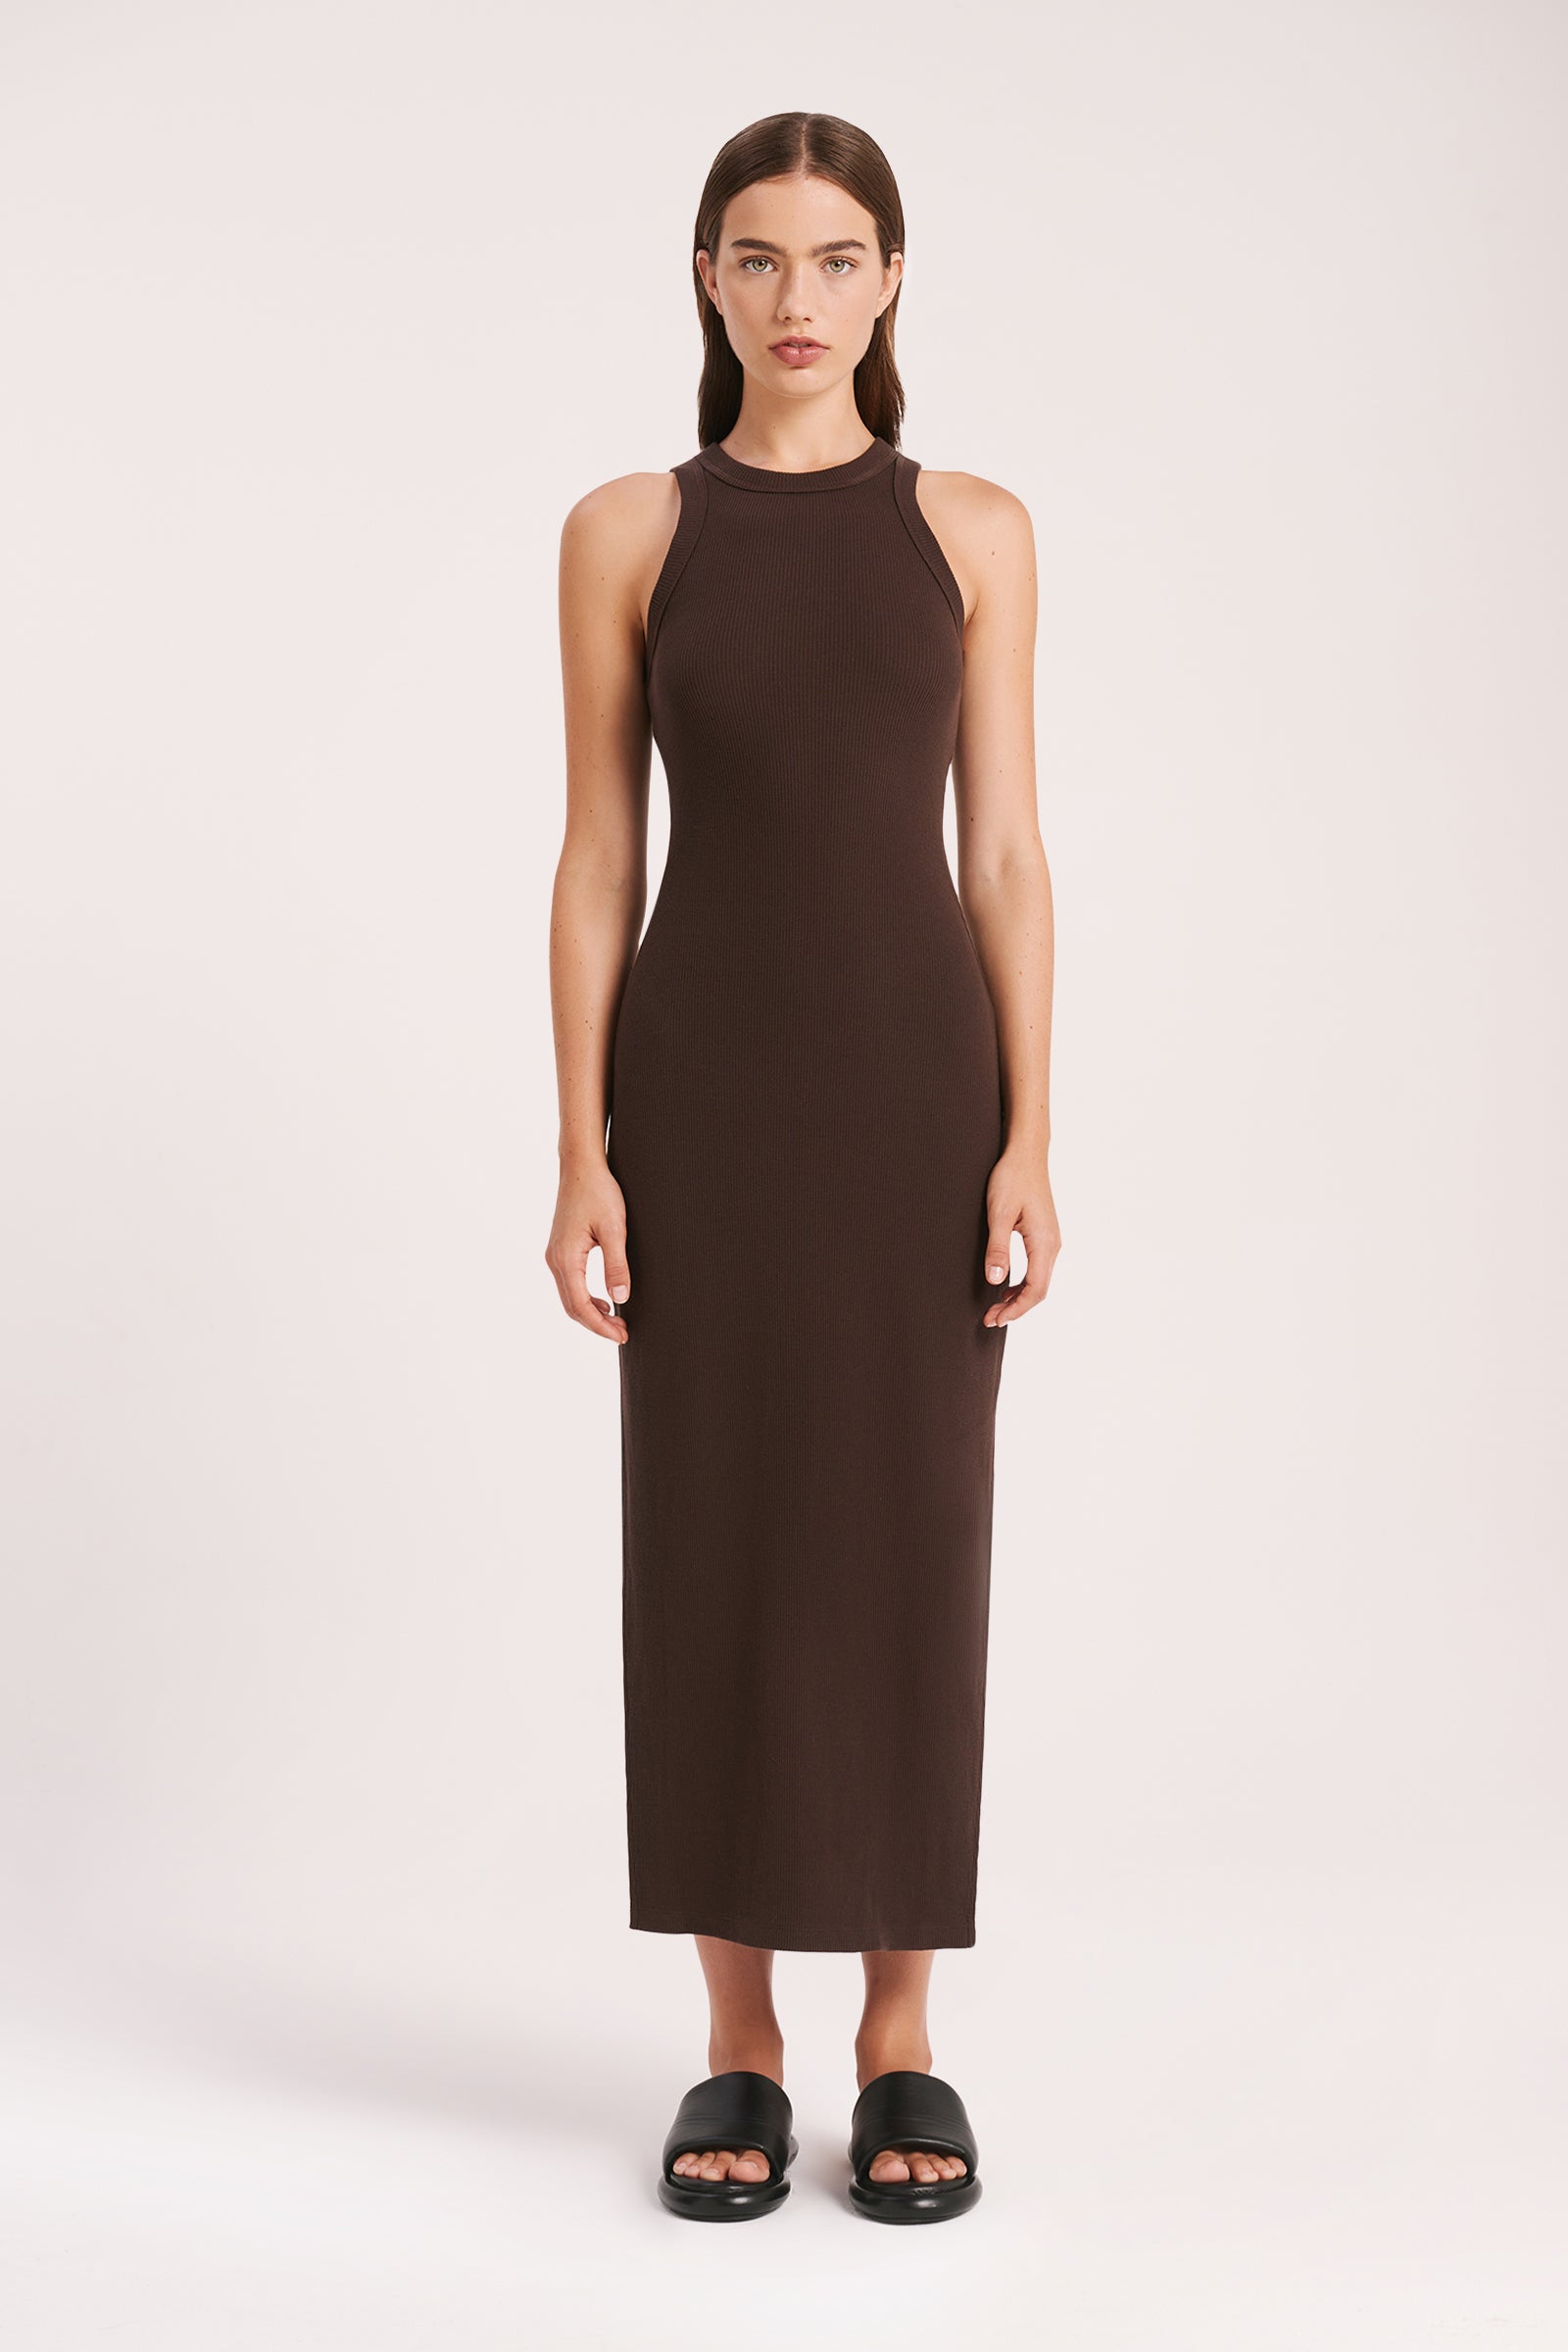 Nude Lucy Sia Waffle Dress In A Brown Cinder Colour